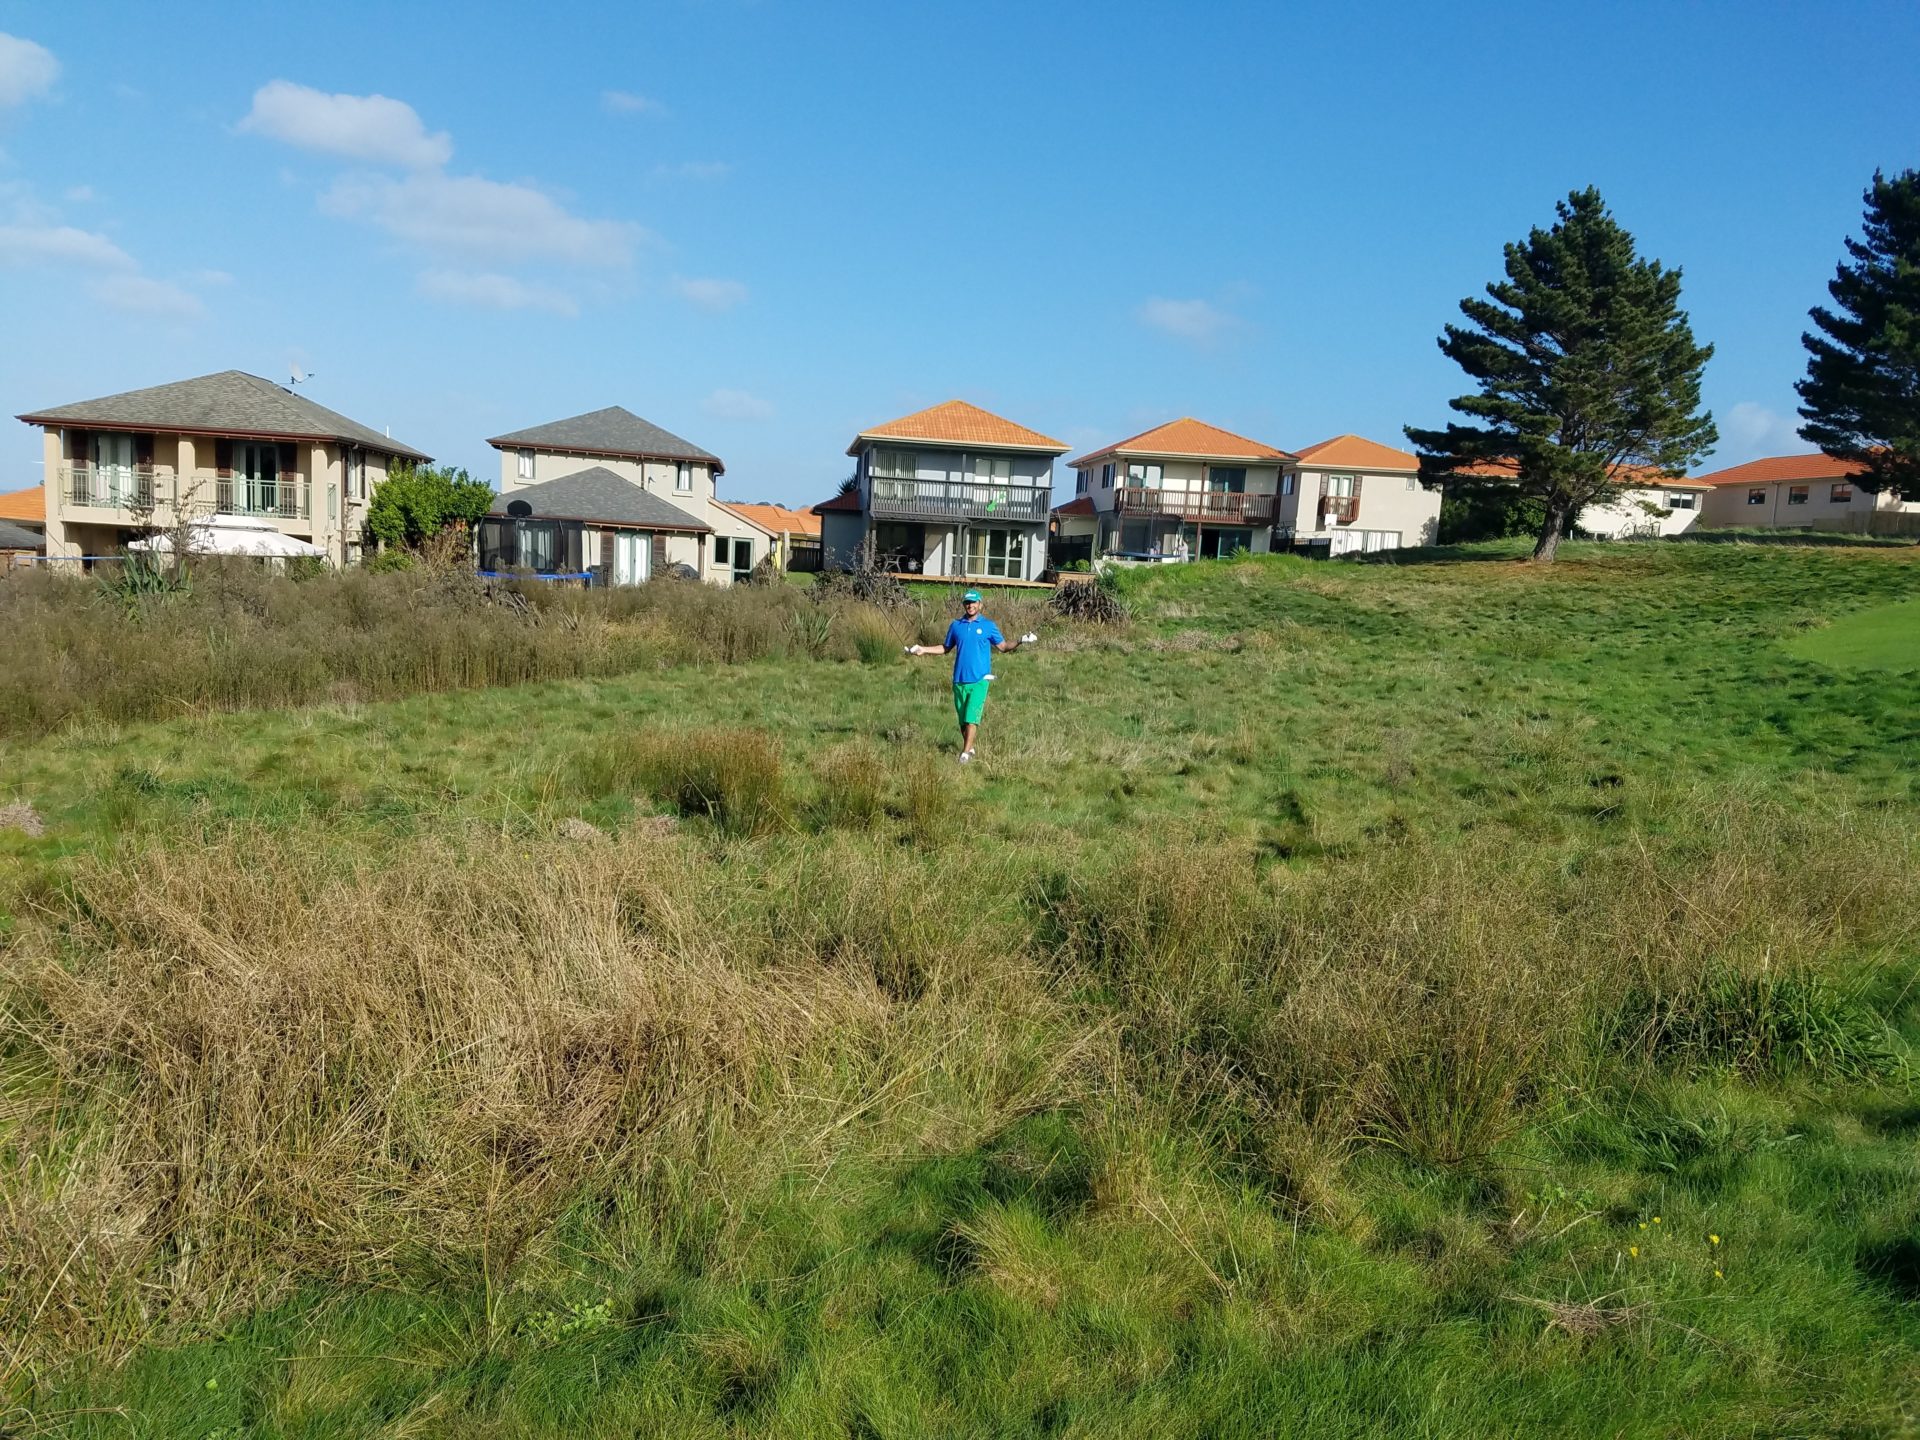 a person in a field with houses in the background